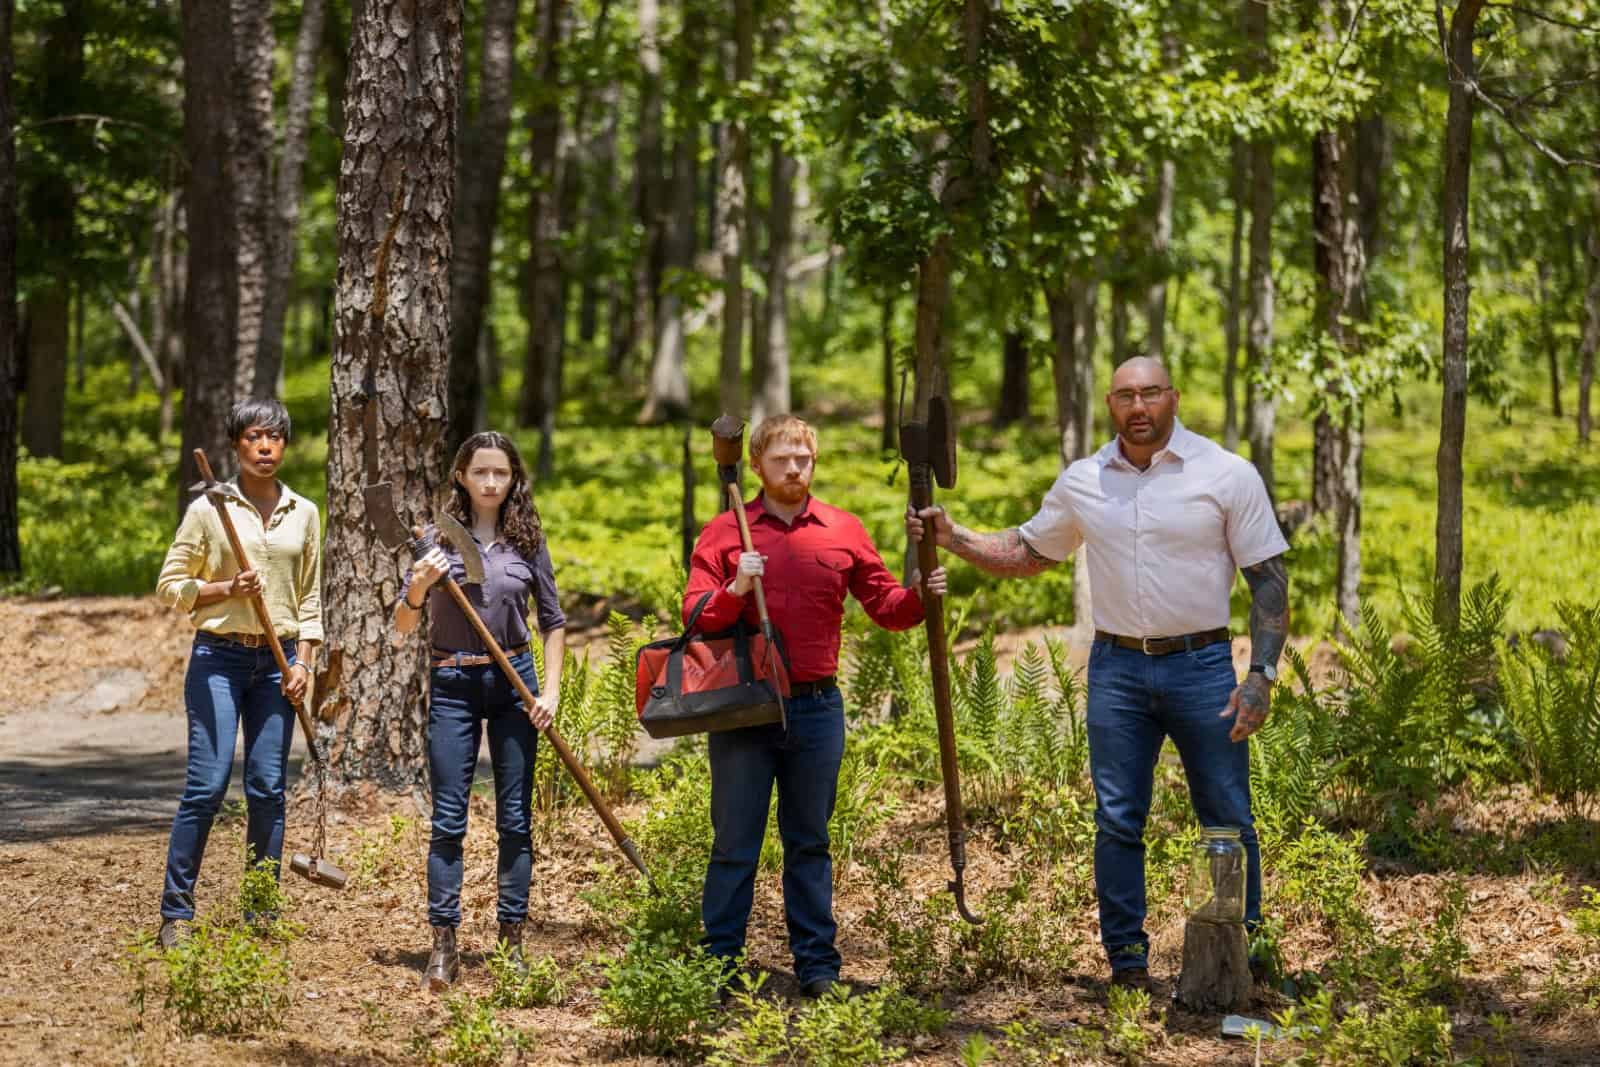 Four people holding pickaxes in the woods in this image from Peacock